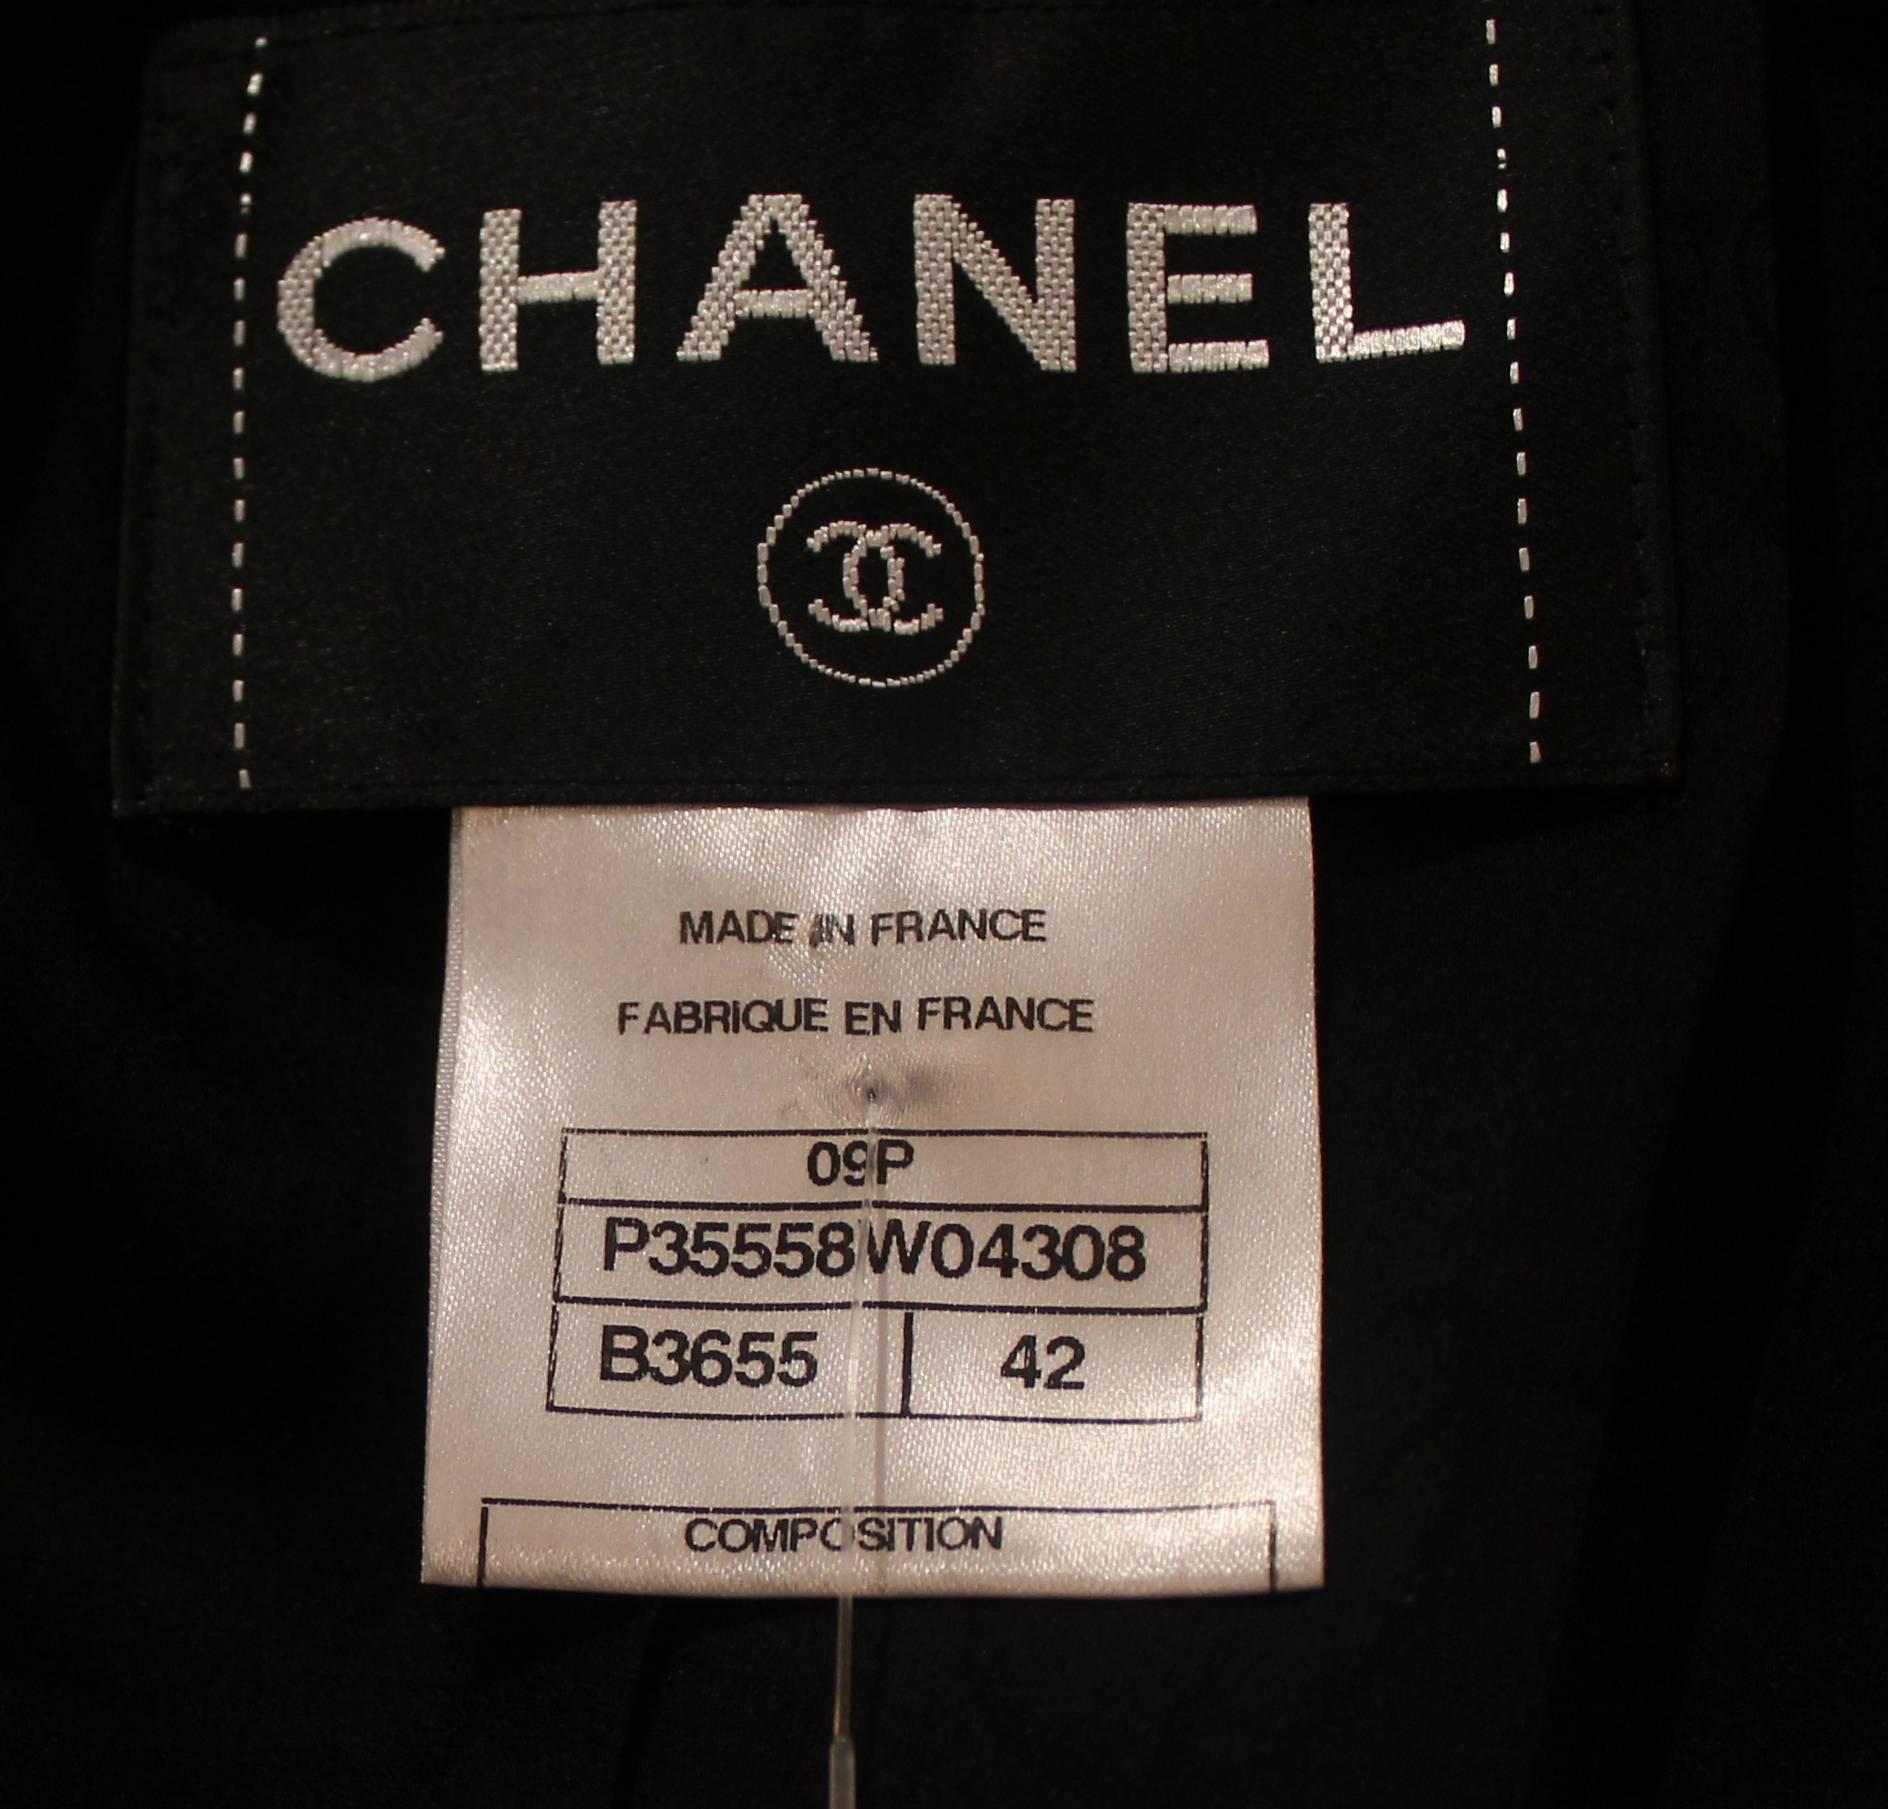 Chanel Runway Spring 2009 Black Linen Blend Jacket w/ White Collar/Cuff - 42 In Excellent Condition For Sale In West Palm Beach, FL